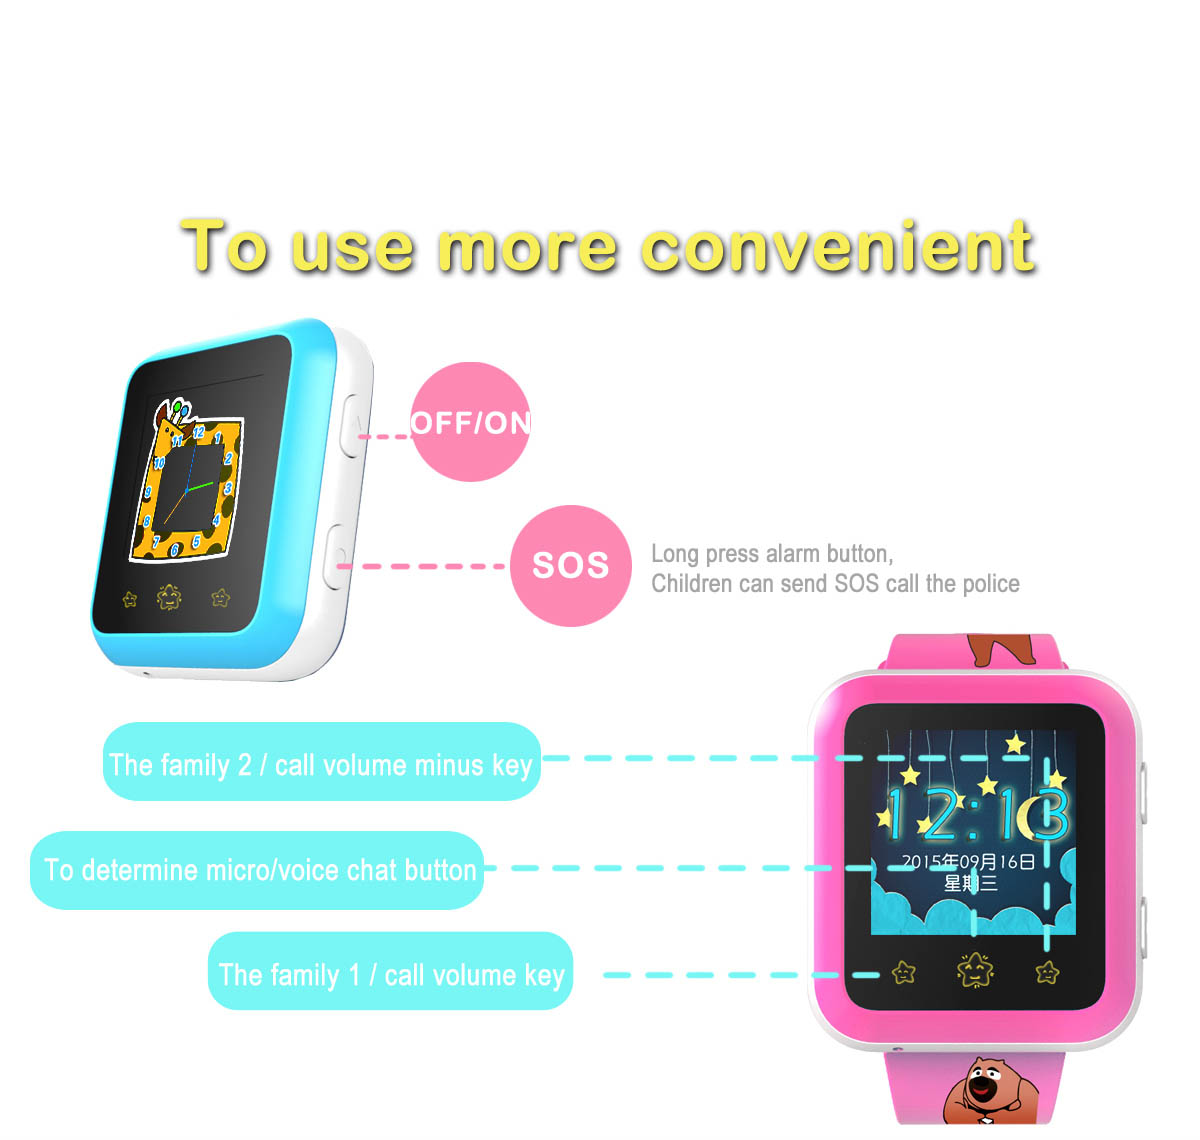 RWATCH XIAO R 1.22 inch Children GPS Smartwatch Phone Touch Screen MTK6261 SOS WiFi Bluetooth Family Numbers IP65 Water-resistant